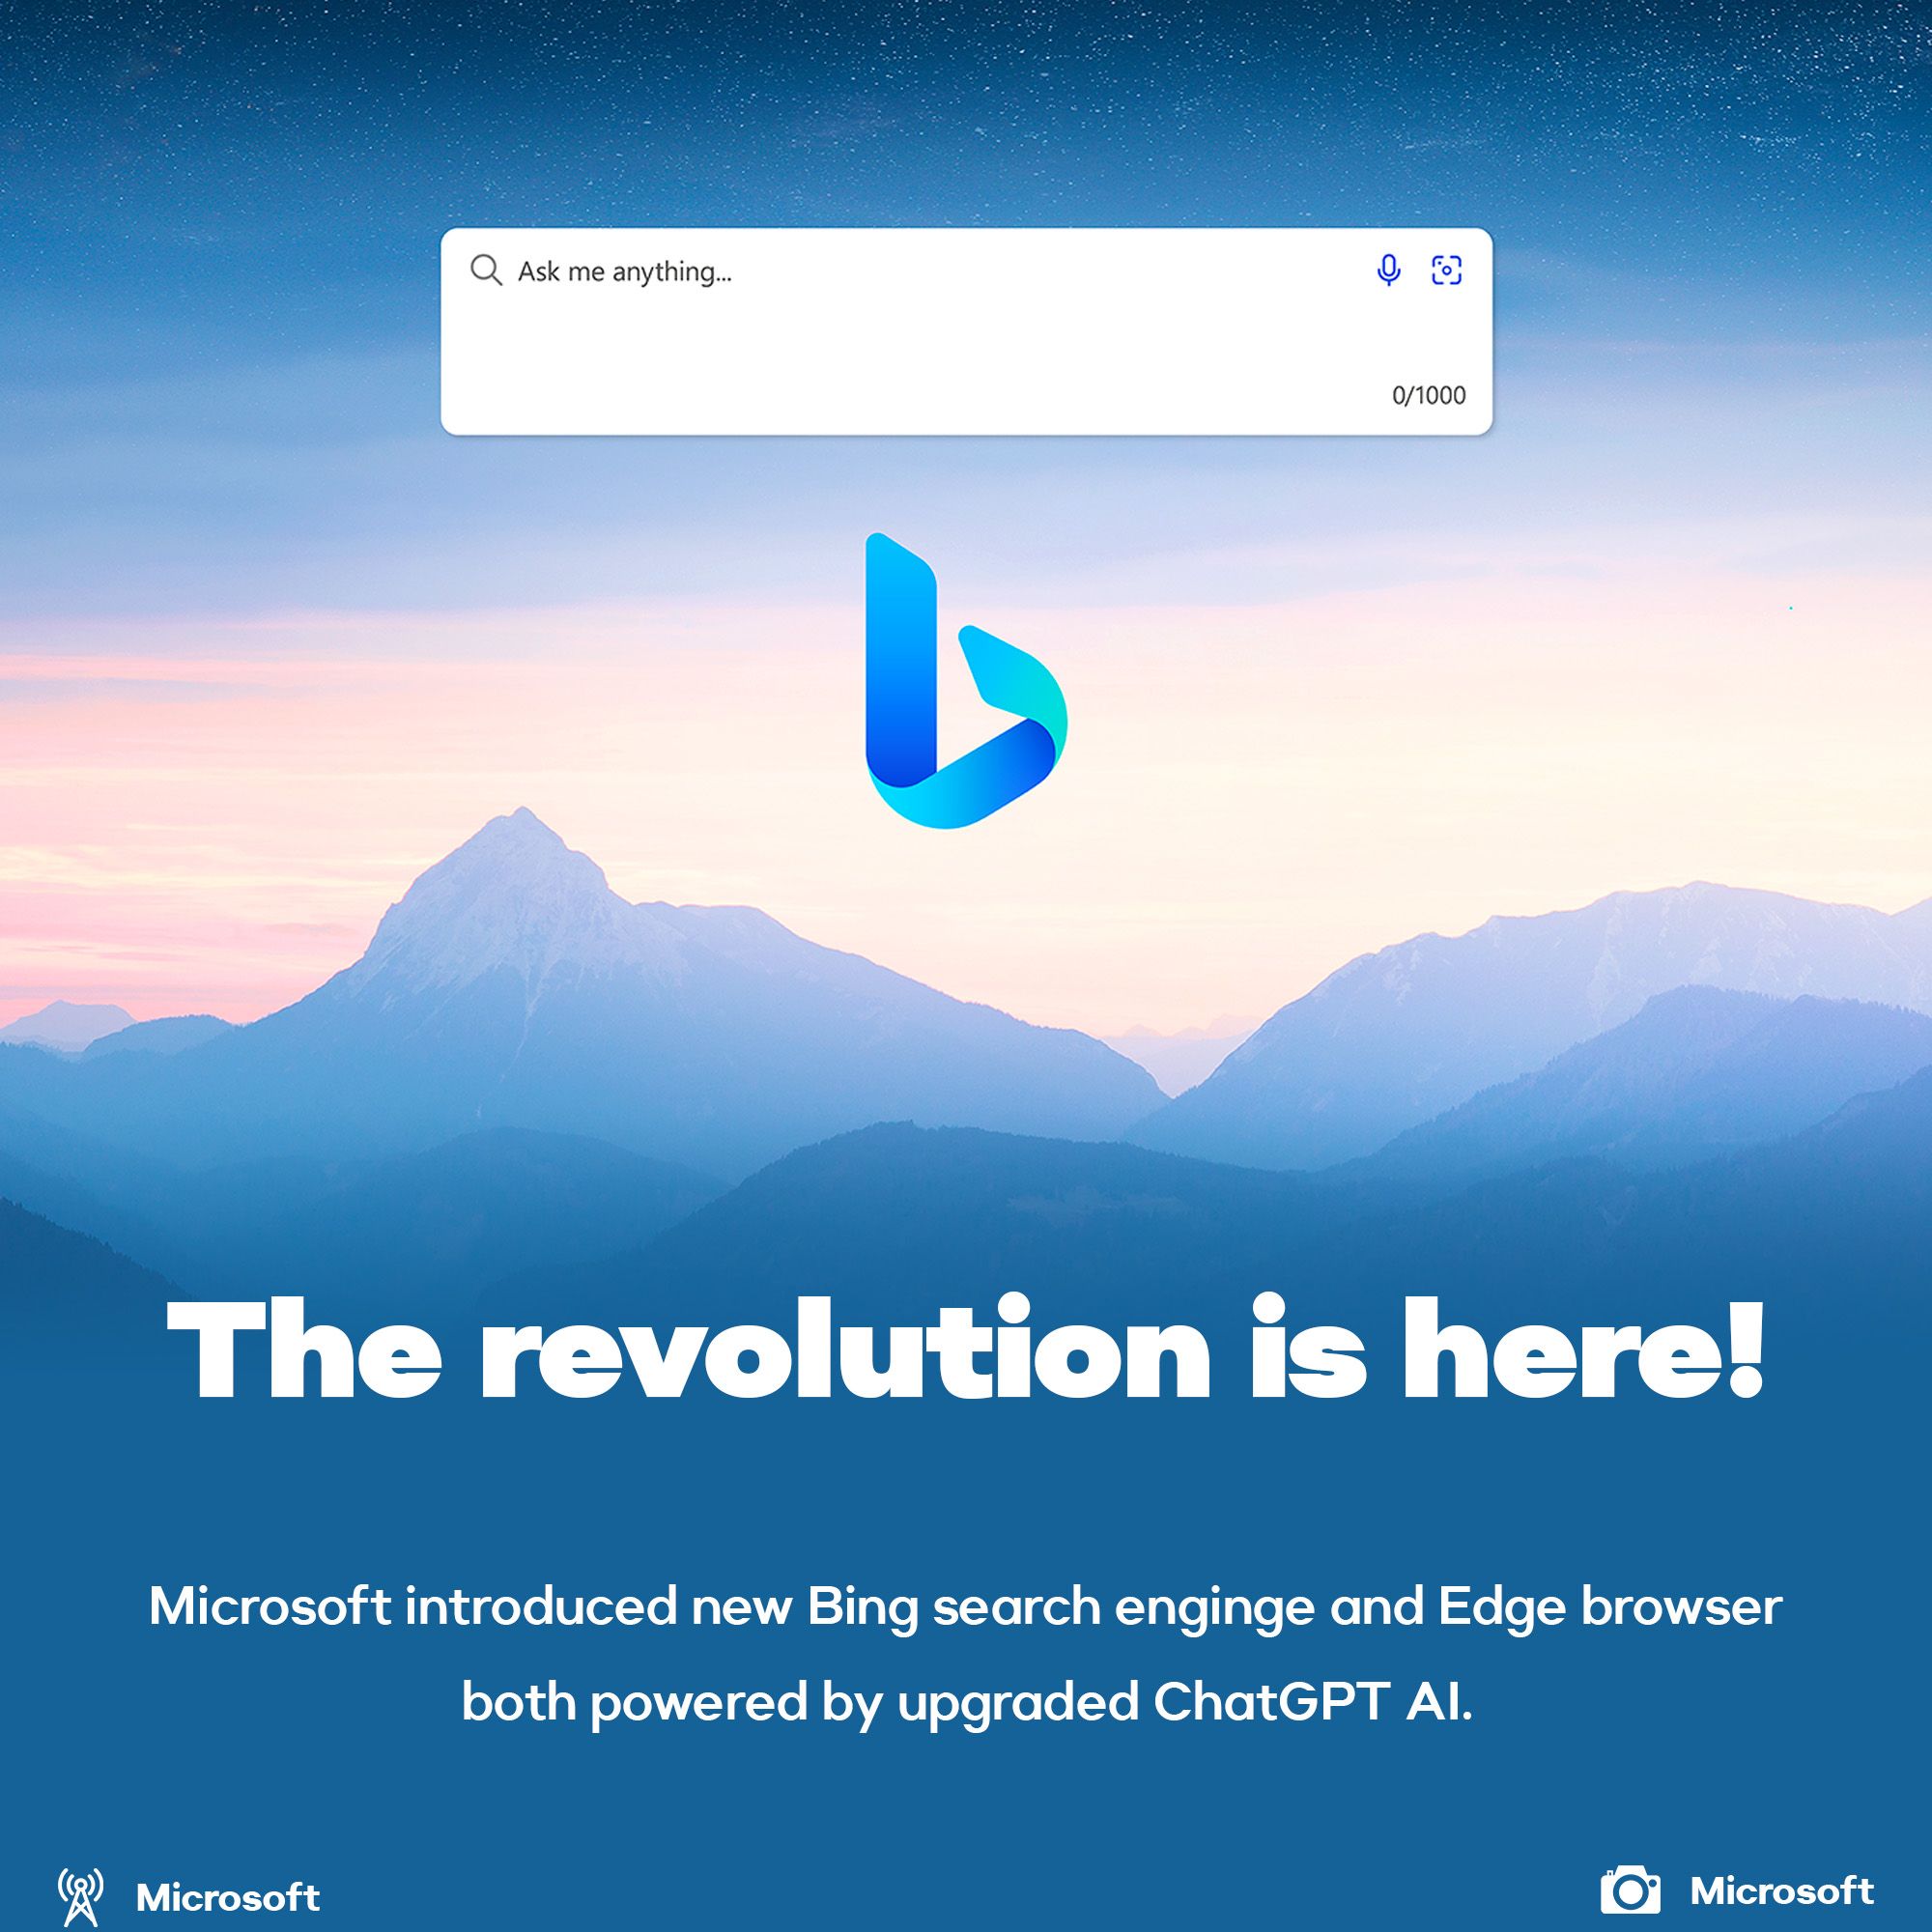 Bing powered by ChatGPT announced